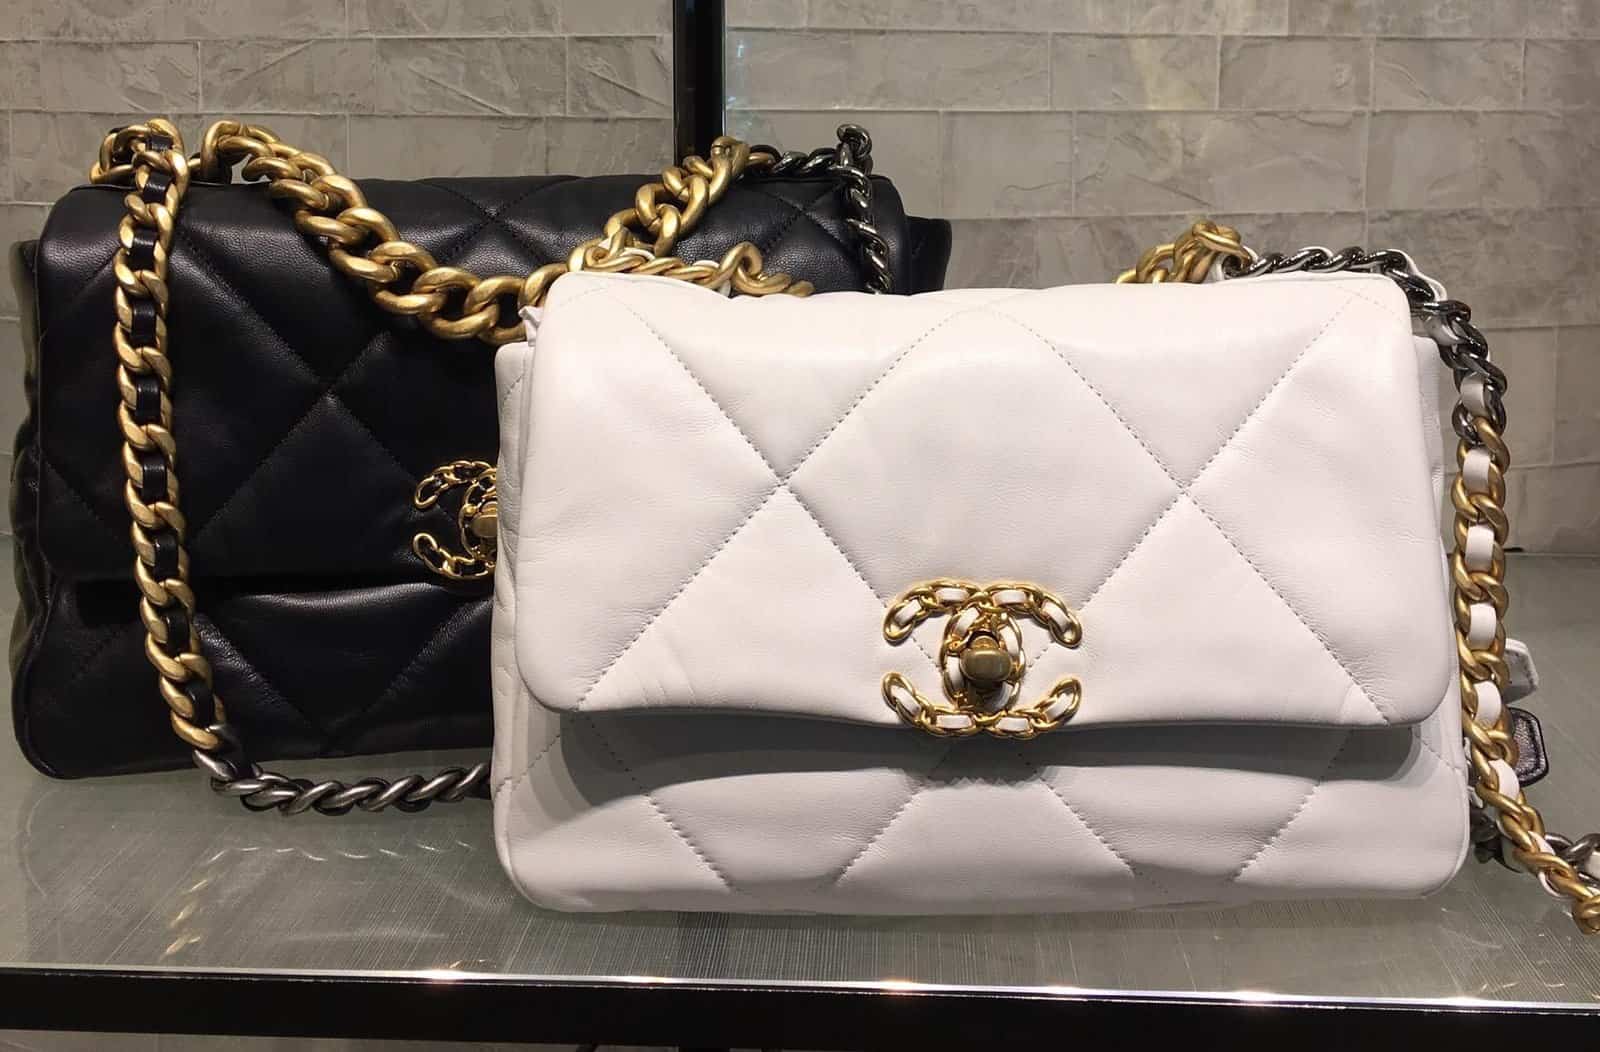 how do i know if my chanel bag is real